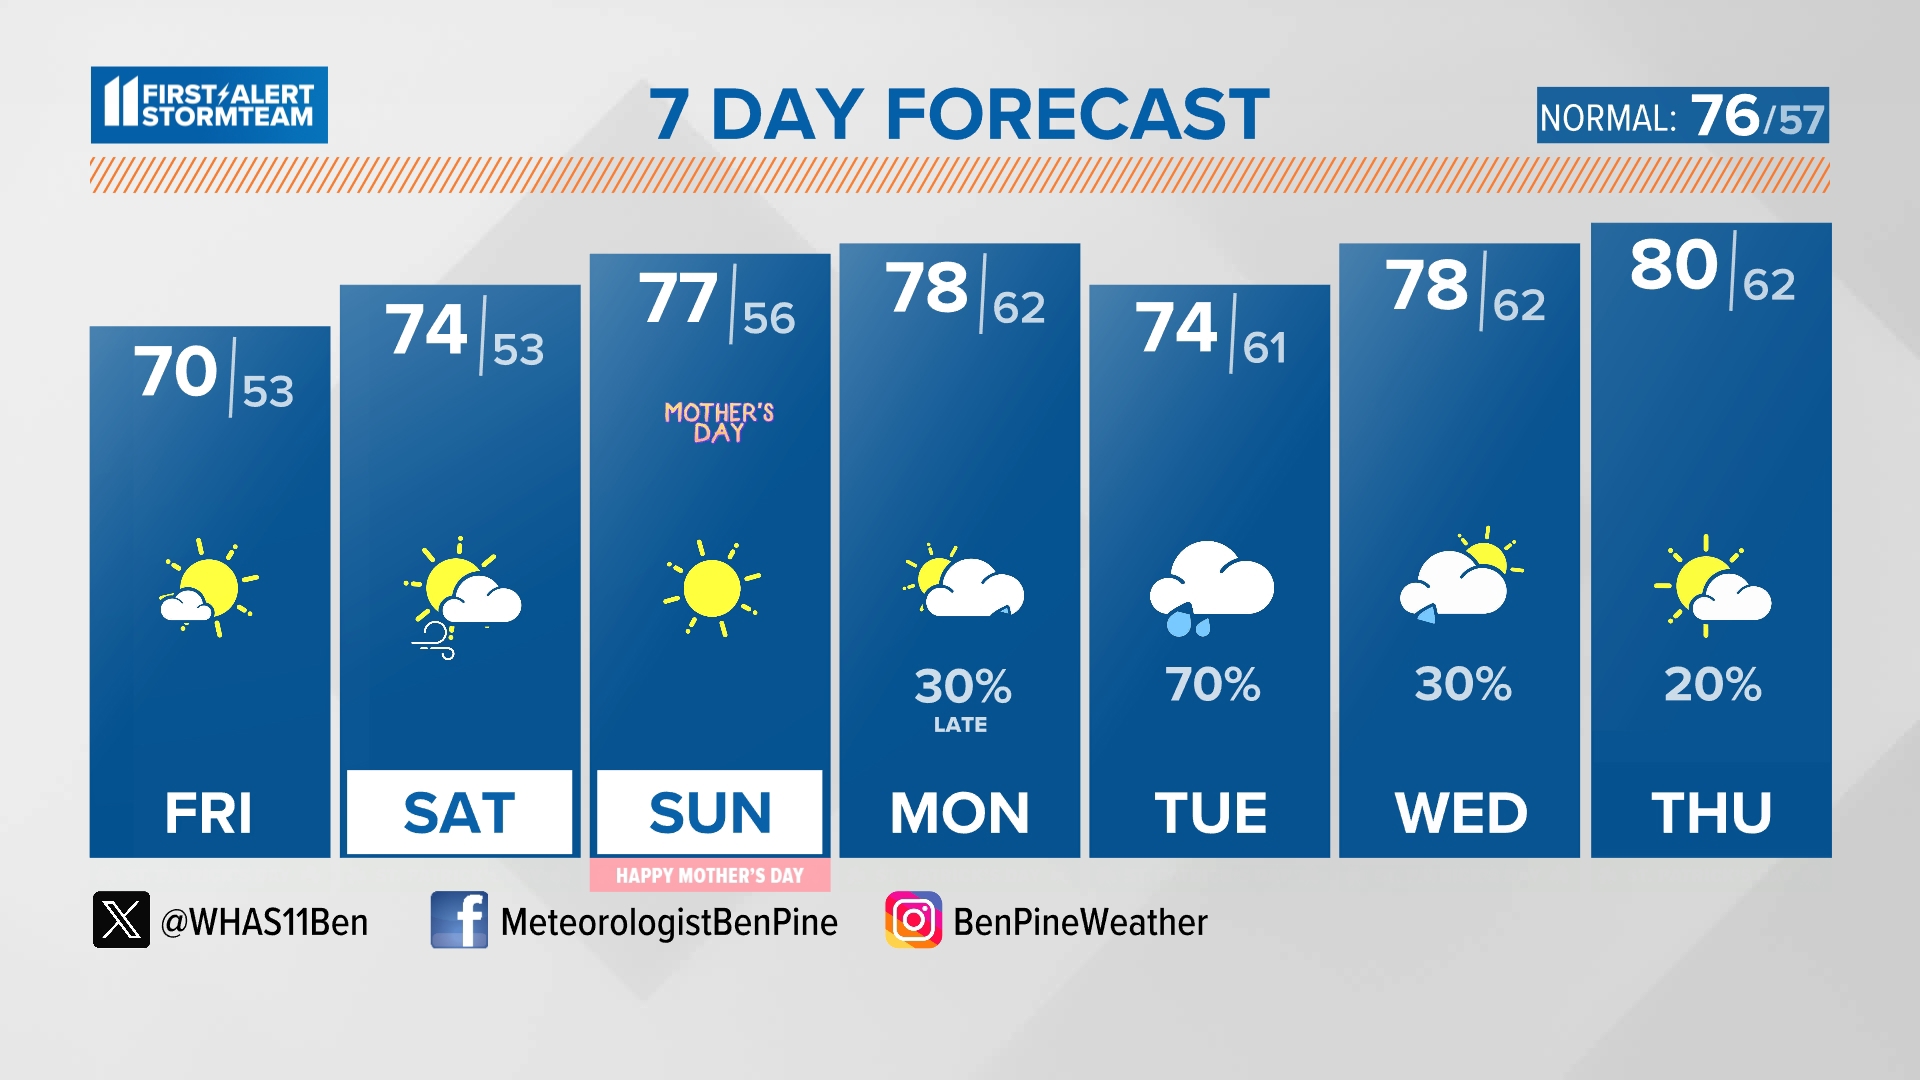 Our Friday will be cooler with highs near 70 degrees, then 70s and sunshine for Mother's Day Weekend.